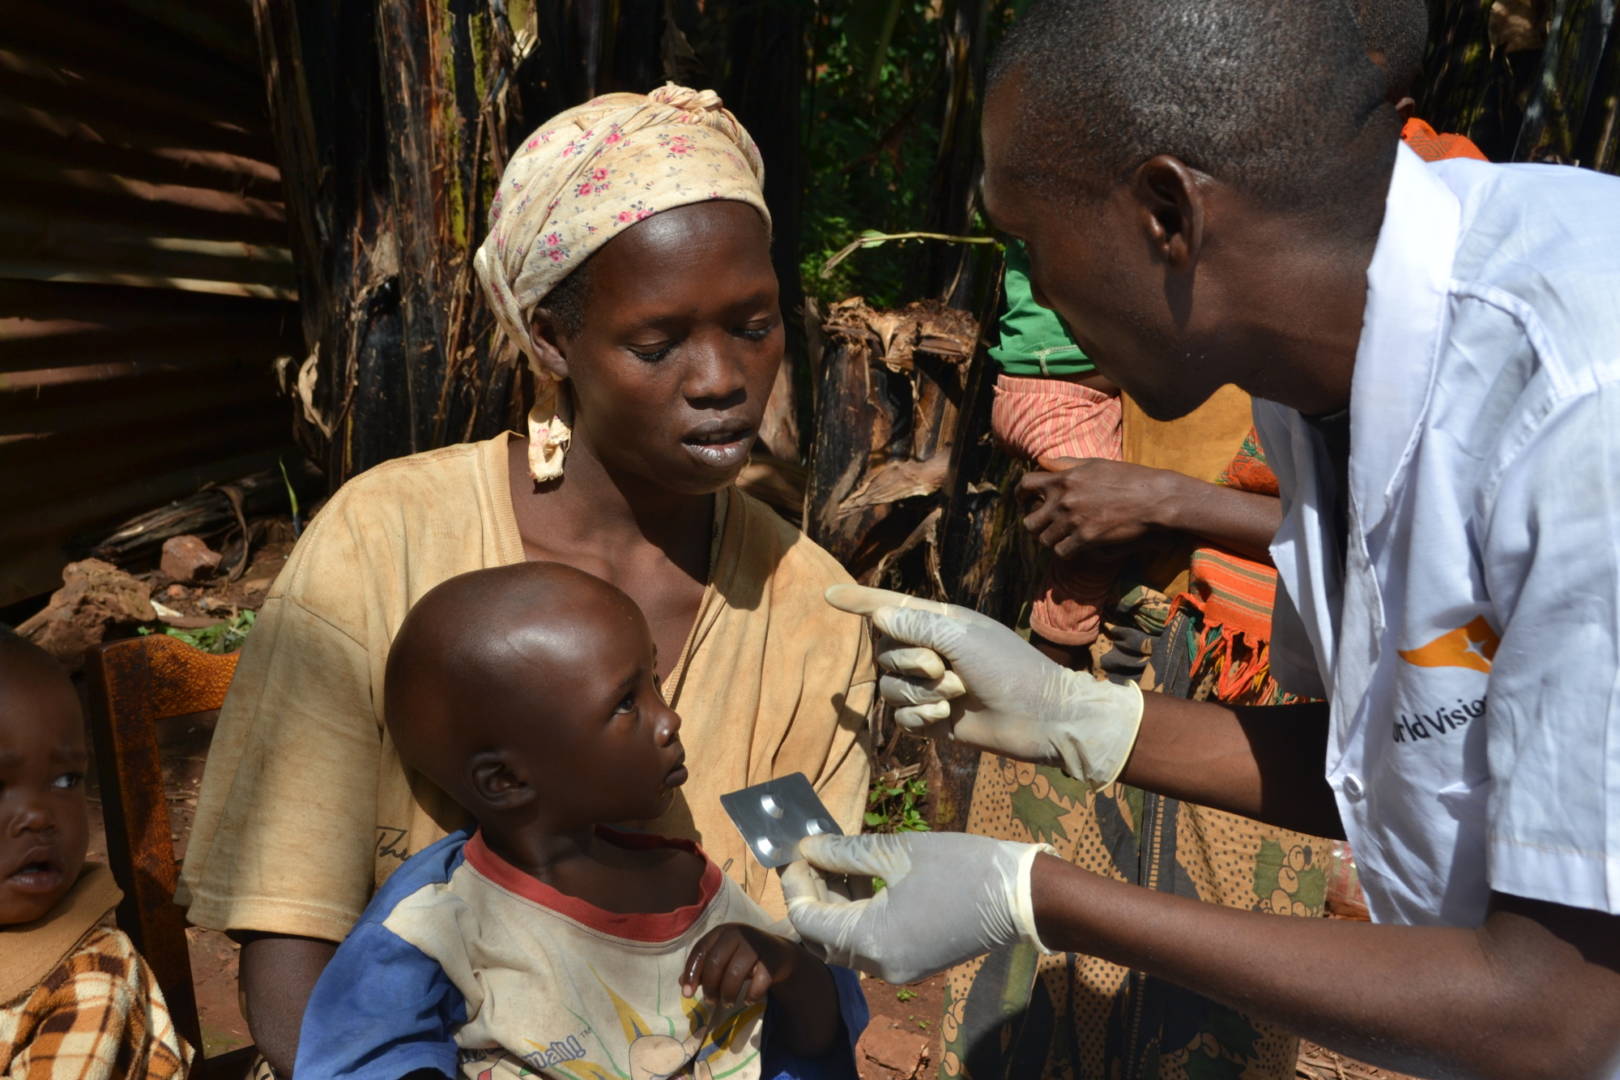 At his home in northeast Burundi, community health worker Diomede, right, diagnoses and treats common ailments of children under age 5. Malaria is among the three most deadly diseases for children this young. (©2016 World Vision, Javan Niyakire)